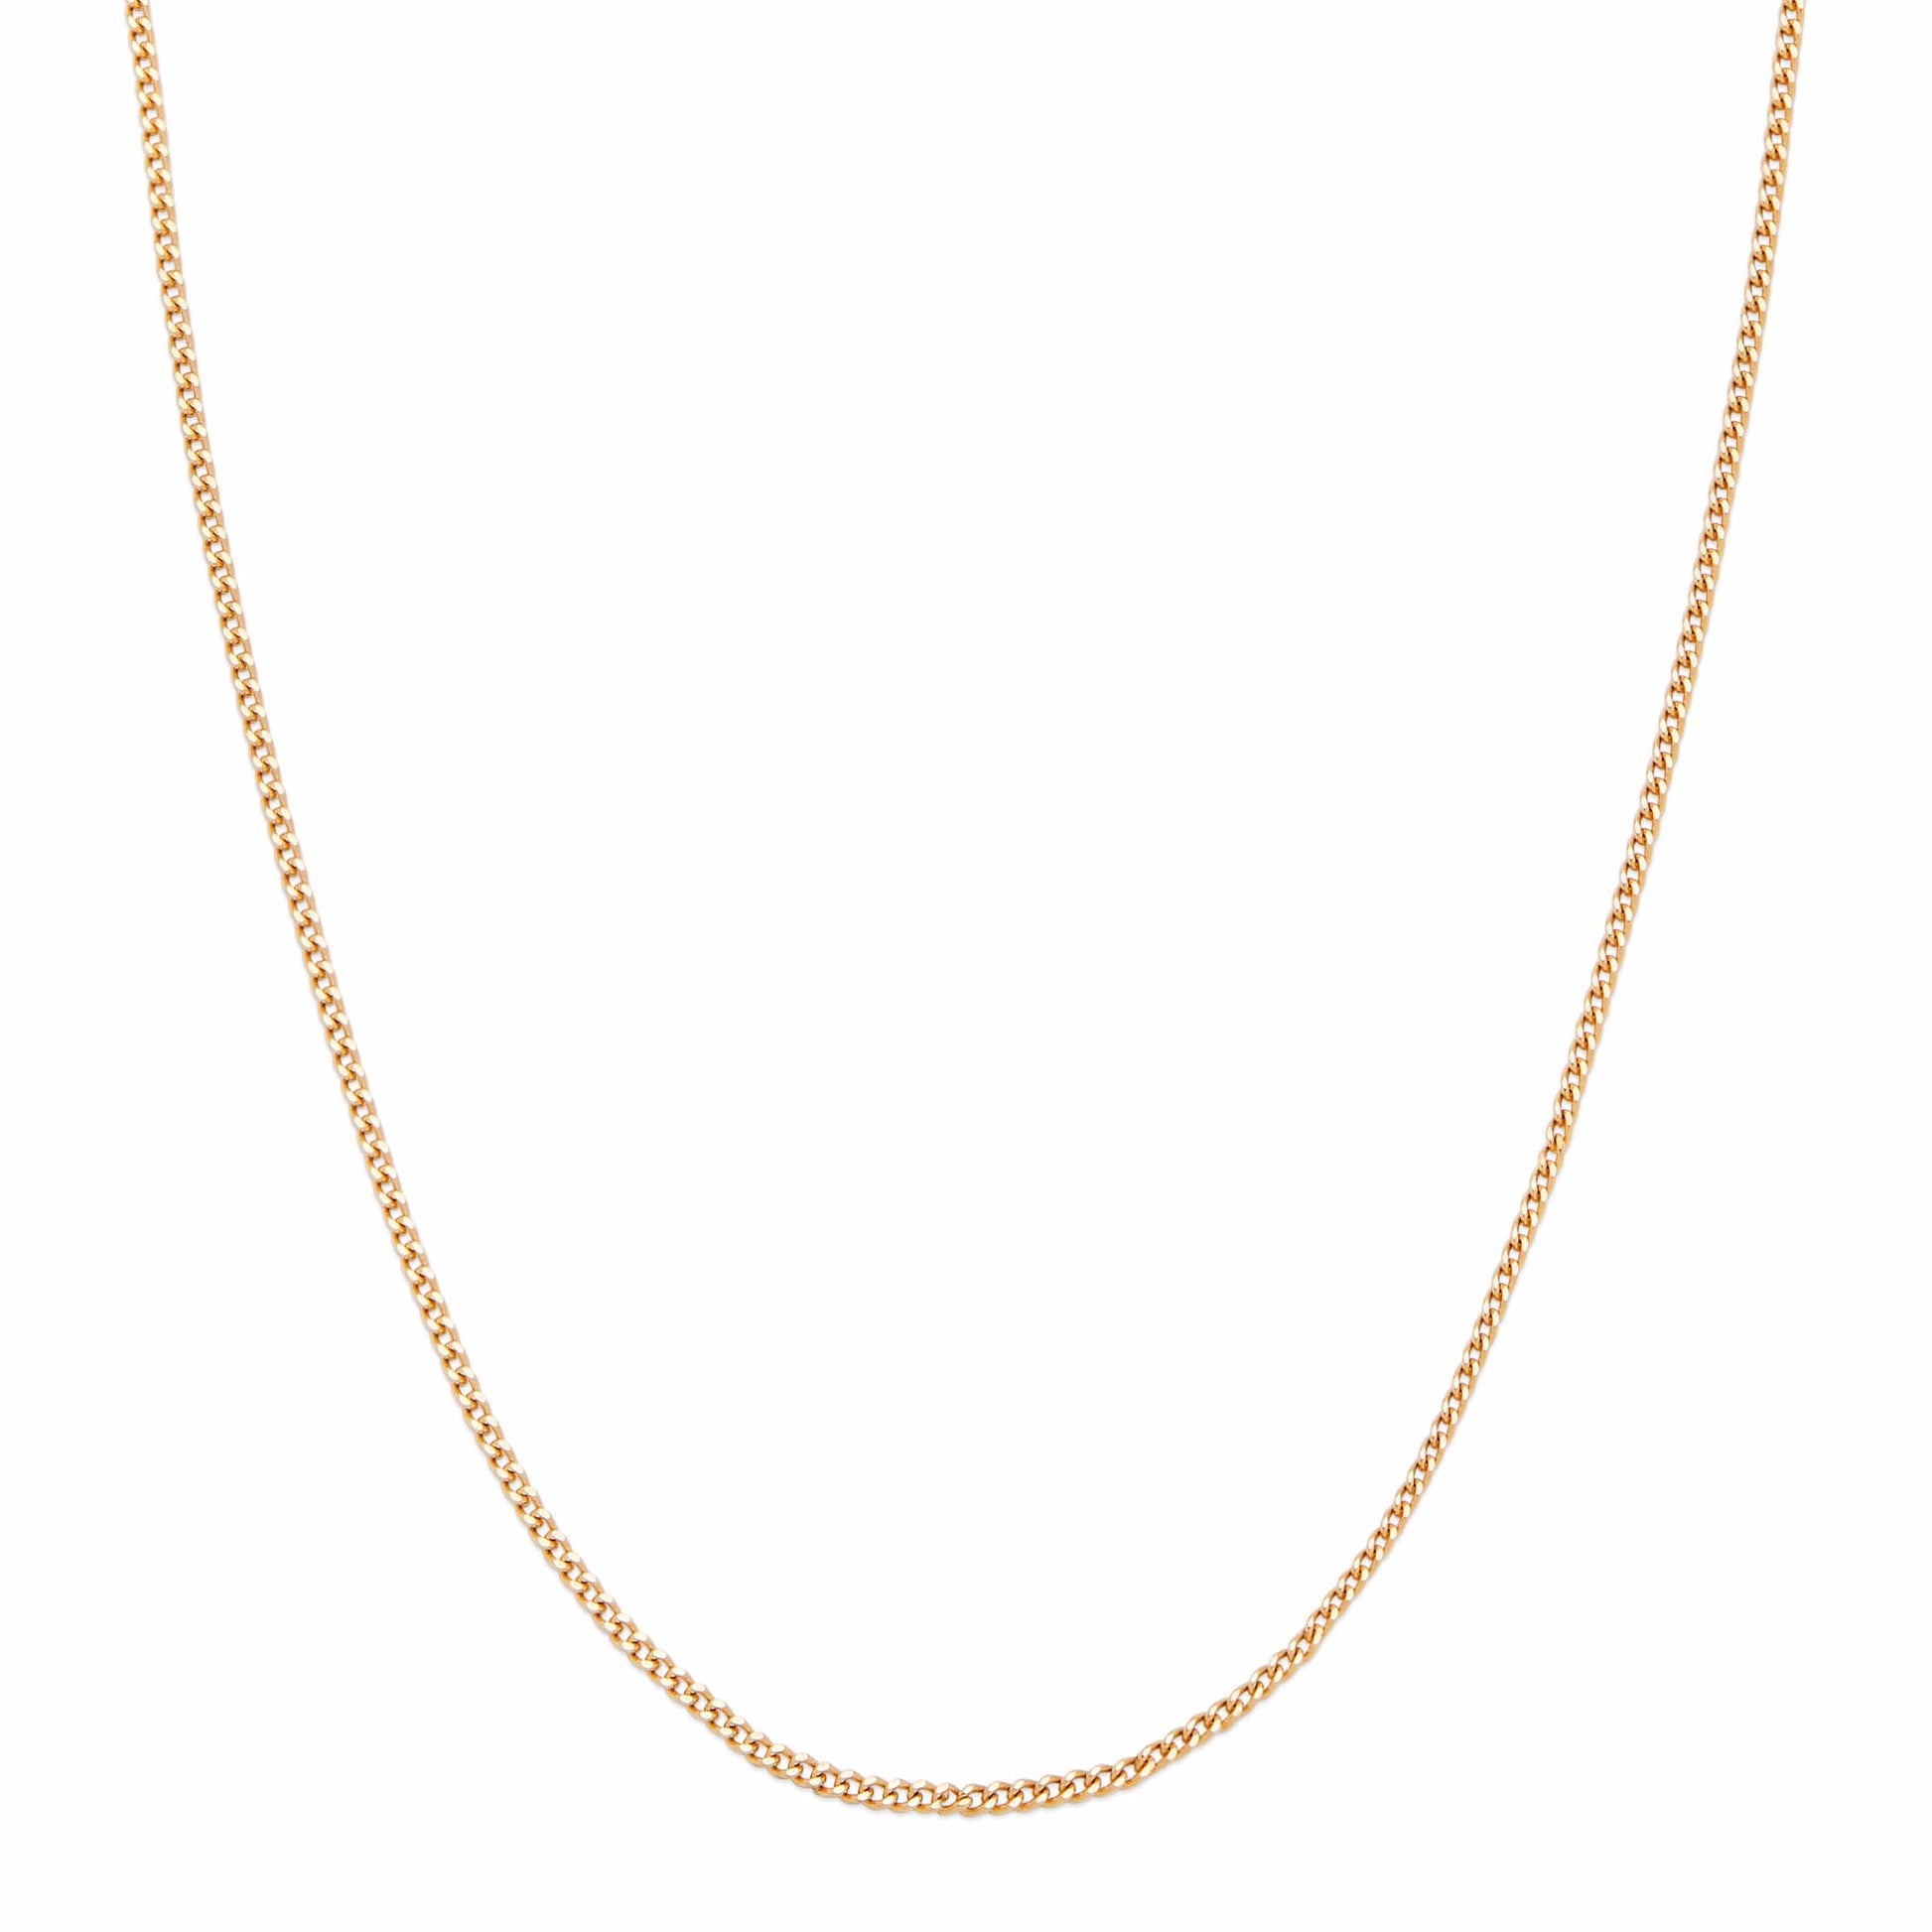 MONDO CATTOLICO Jewelry Yellow Gold ' Borghese' Chain 18 kt.